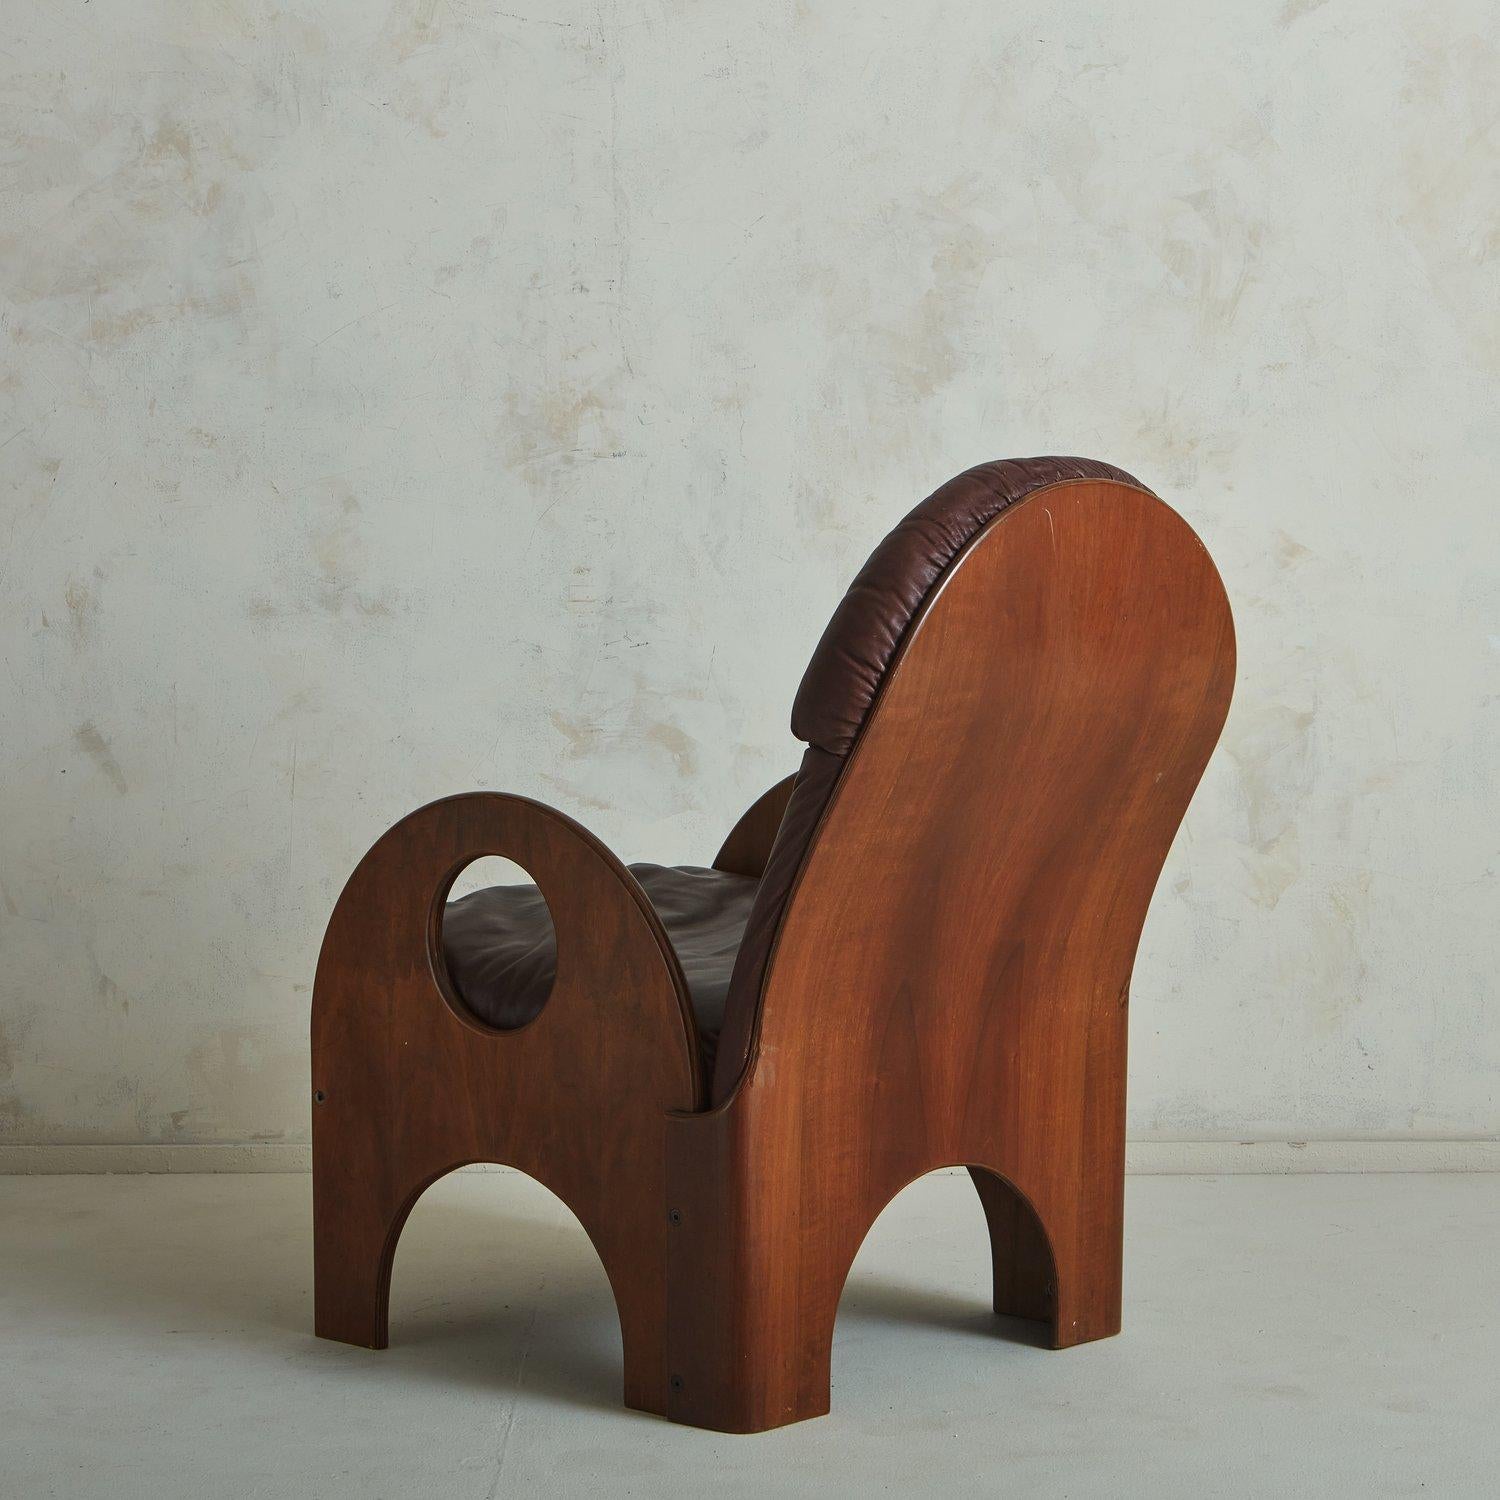 Walnut + Leather 'Arcata' Chair by Gae Aulenti for Poltronova, Italy 1968 In Good Condition For Sale In Chicago, IL